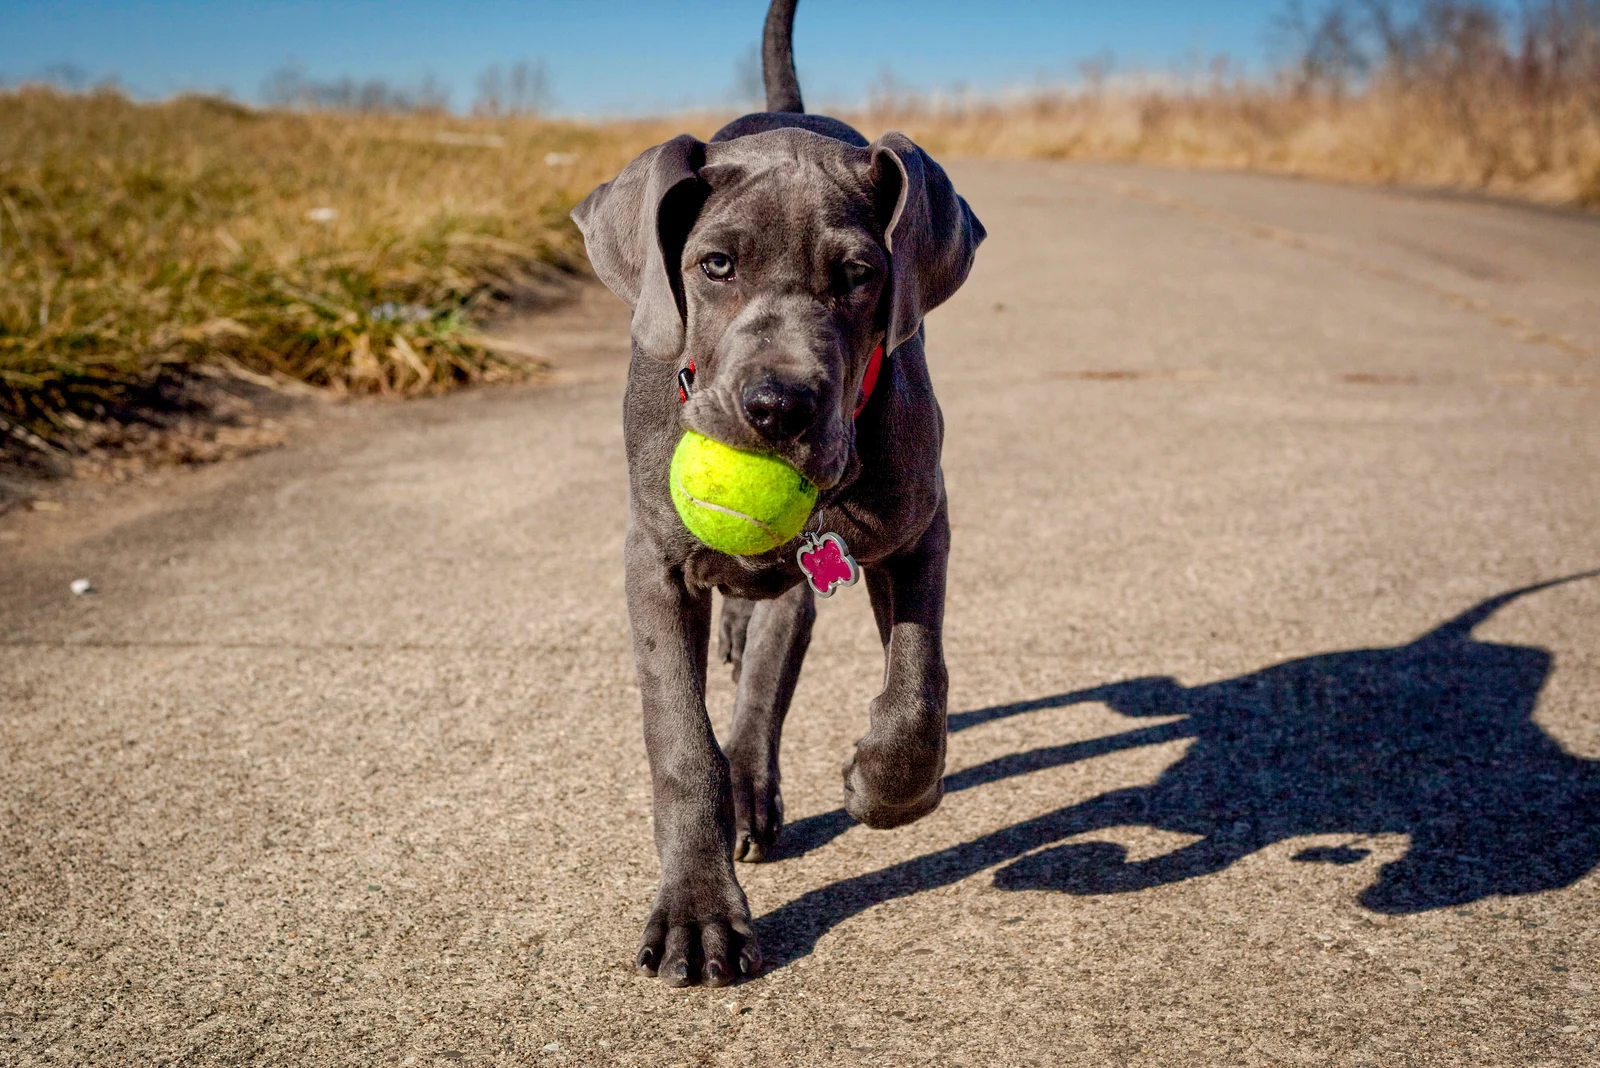 An adorable great Dane puppy carrying a tennis ball in its mouth